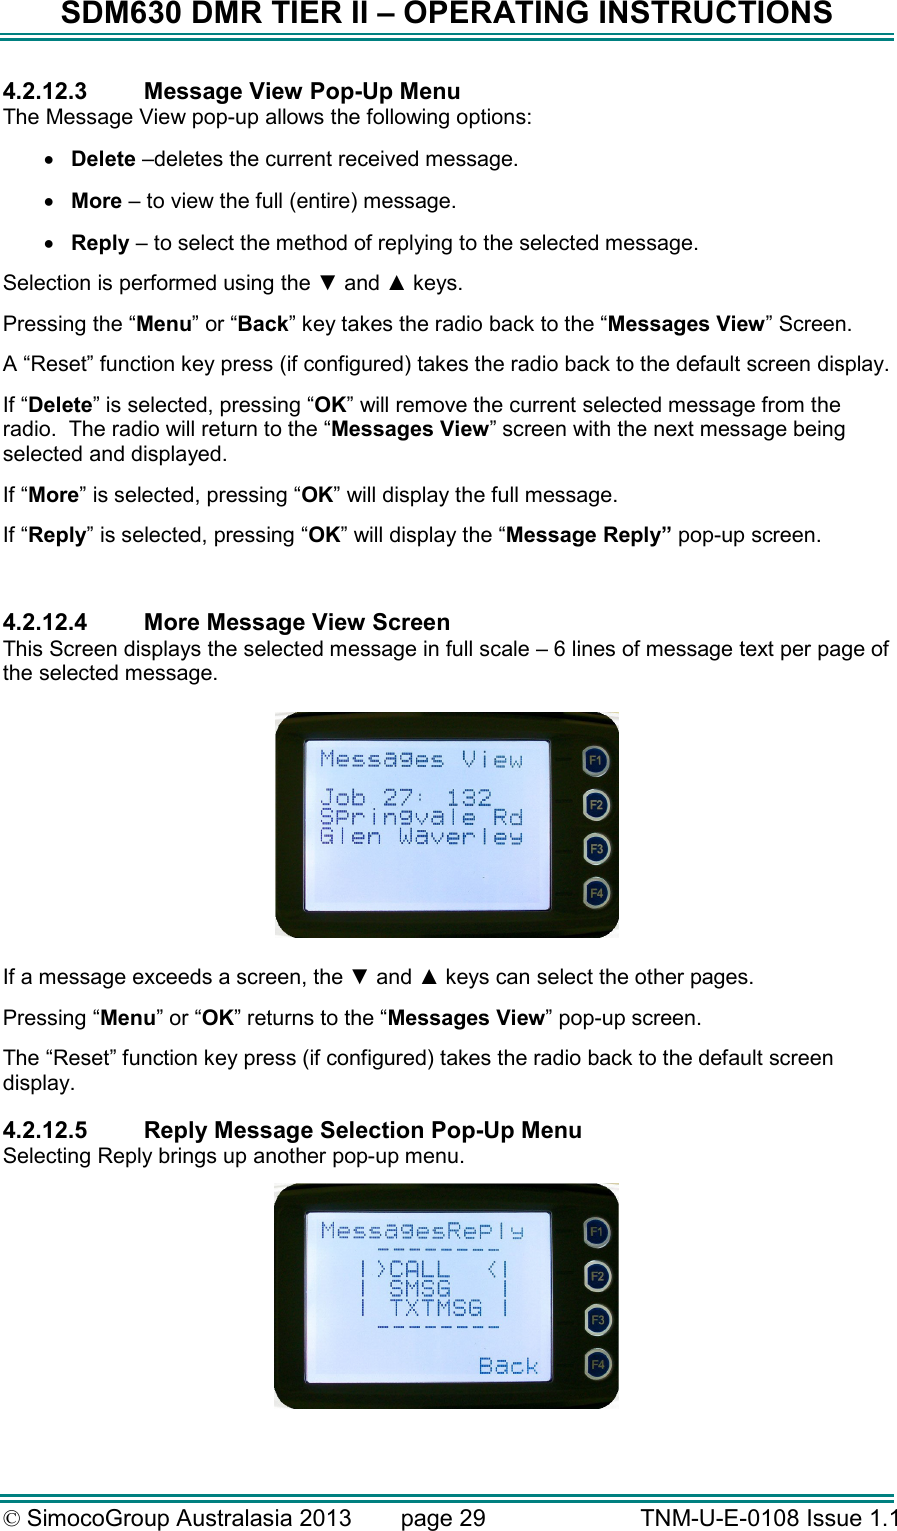 SDM630 DMR TIER II – OPERATING INSTRUCTIONS © SimocoGroup Australasia 2013   page 29   TNM-U-E-0108 Issue 1.1 4.2.12.3  Message View Pop-Up Menu The Message View pop-up allows the following options: •  Delete –deletes the current received message. •  More – to view the full (entire) message. •  Reply – to select the method of replying to the selected message. Selection is performed using the ▼ and ▲ keys. Pressing the “Menu” or “Back” key takes the radio back to the “Messages View” Screen. A “Reset” function key press (if configured) takes the radio back to the default screen display. If “Delete” is selected, pressing “OK” will remove the current selected message from the radio.  The radio will return to the “Messages View” screen with the next message being selected and displayed. If “More” is selected, pressing “OK” will display the full message. If “Reply” is selected, pressing “OK” will display the “Message Reply” pop-up screen.  4.2.12.4  More Message View Screen This Screen displays the selected message in full scale – 6 lines of message text per page of the selected message.    If a message exceeds a screen, the ▼ and ▲ keys can select the other pages. Pressing “Menu” or “OK” returns to the “Messages View” pop-up screen. The “Reset” function key press (if configured) takes the radio back to the default screen display. 4.2.12.5  Reply Message Selection Pop-Up Menu Selecting Reply brings up another pop-up menu.   